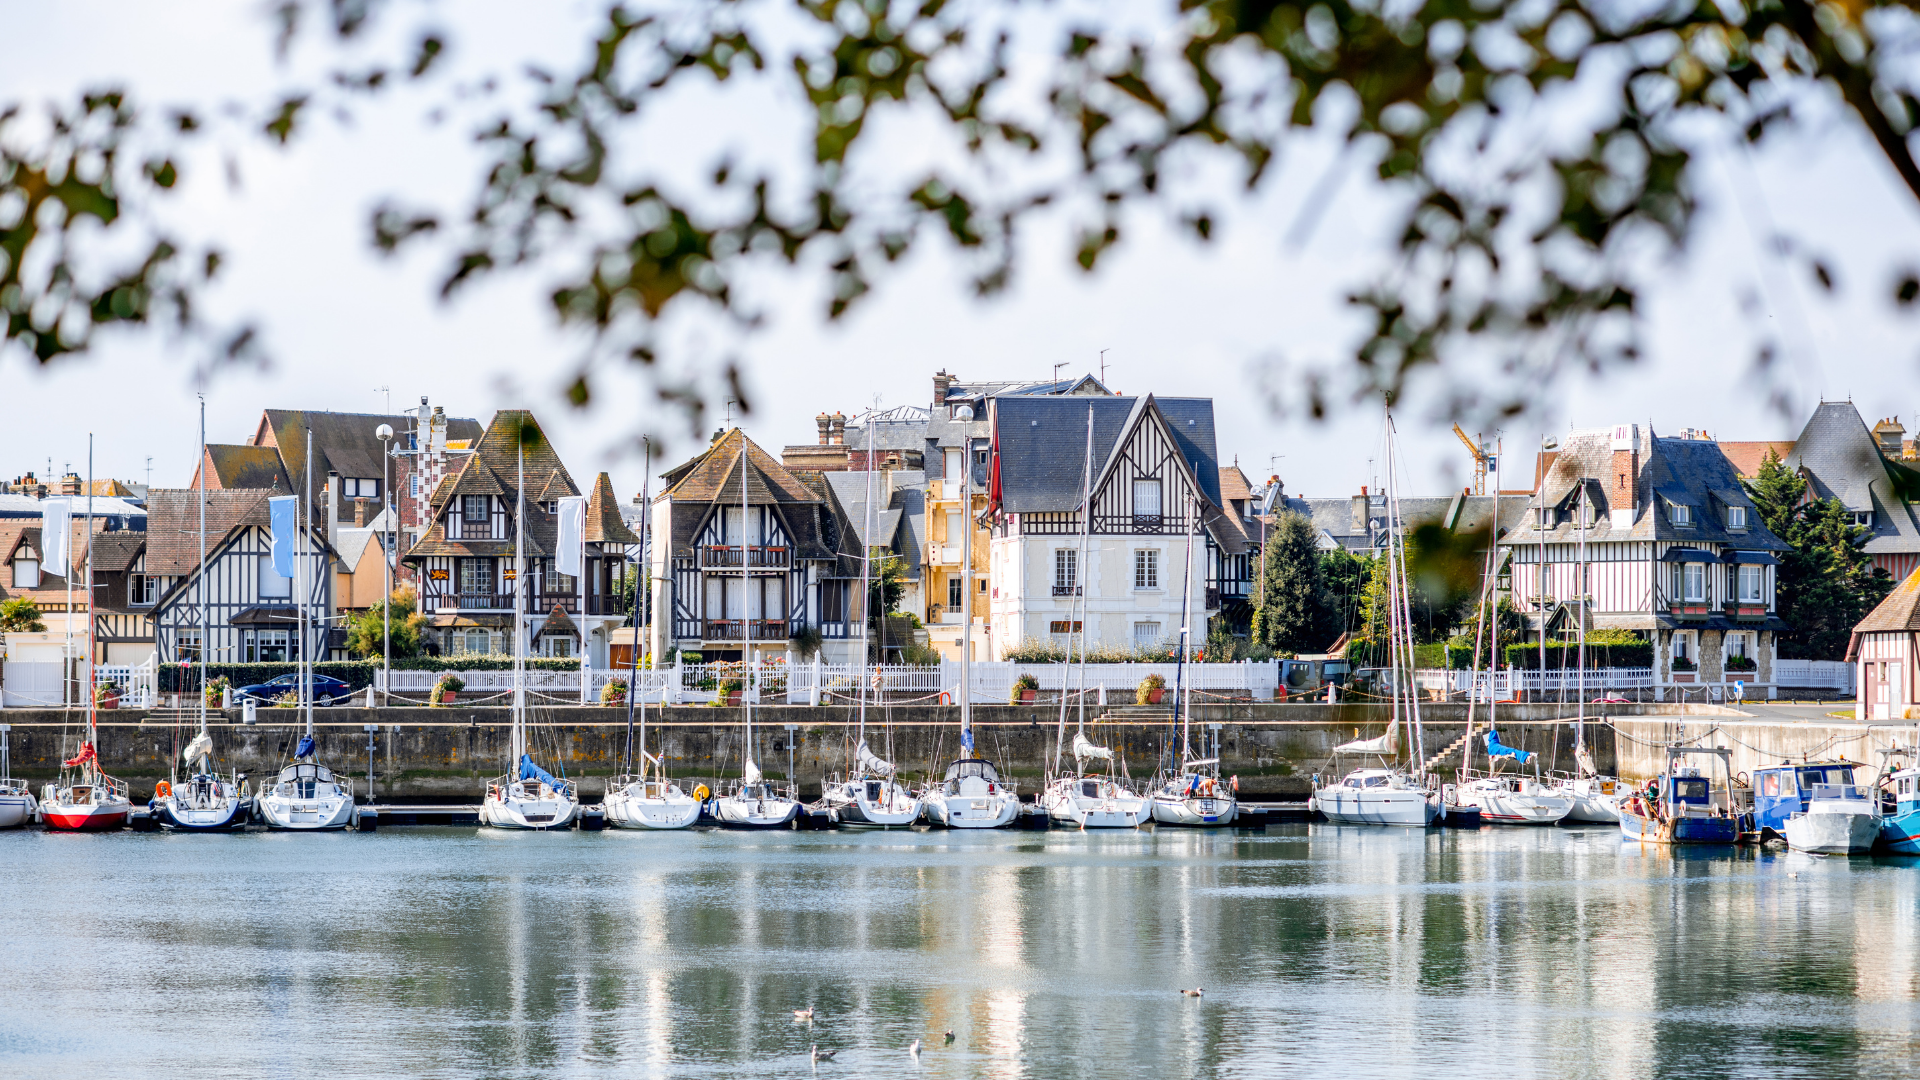 Deauville, a cute town in France